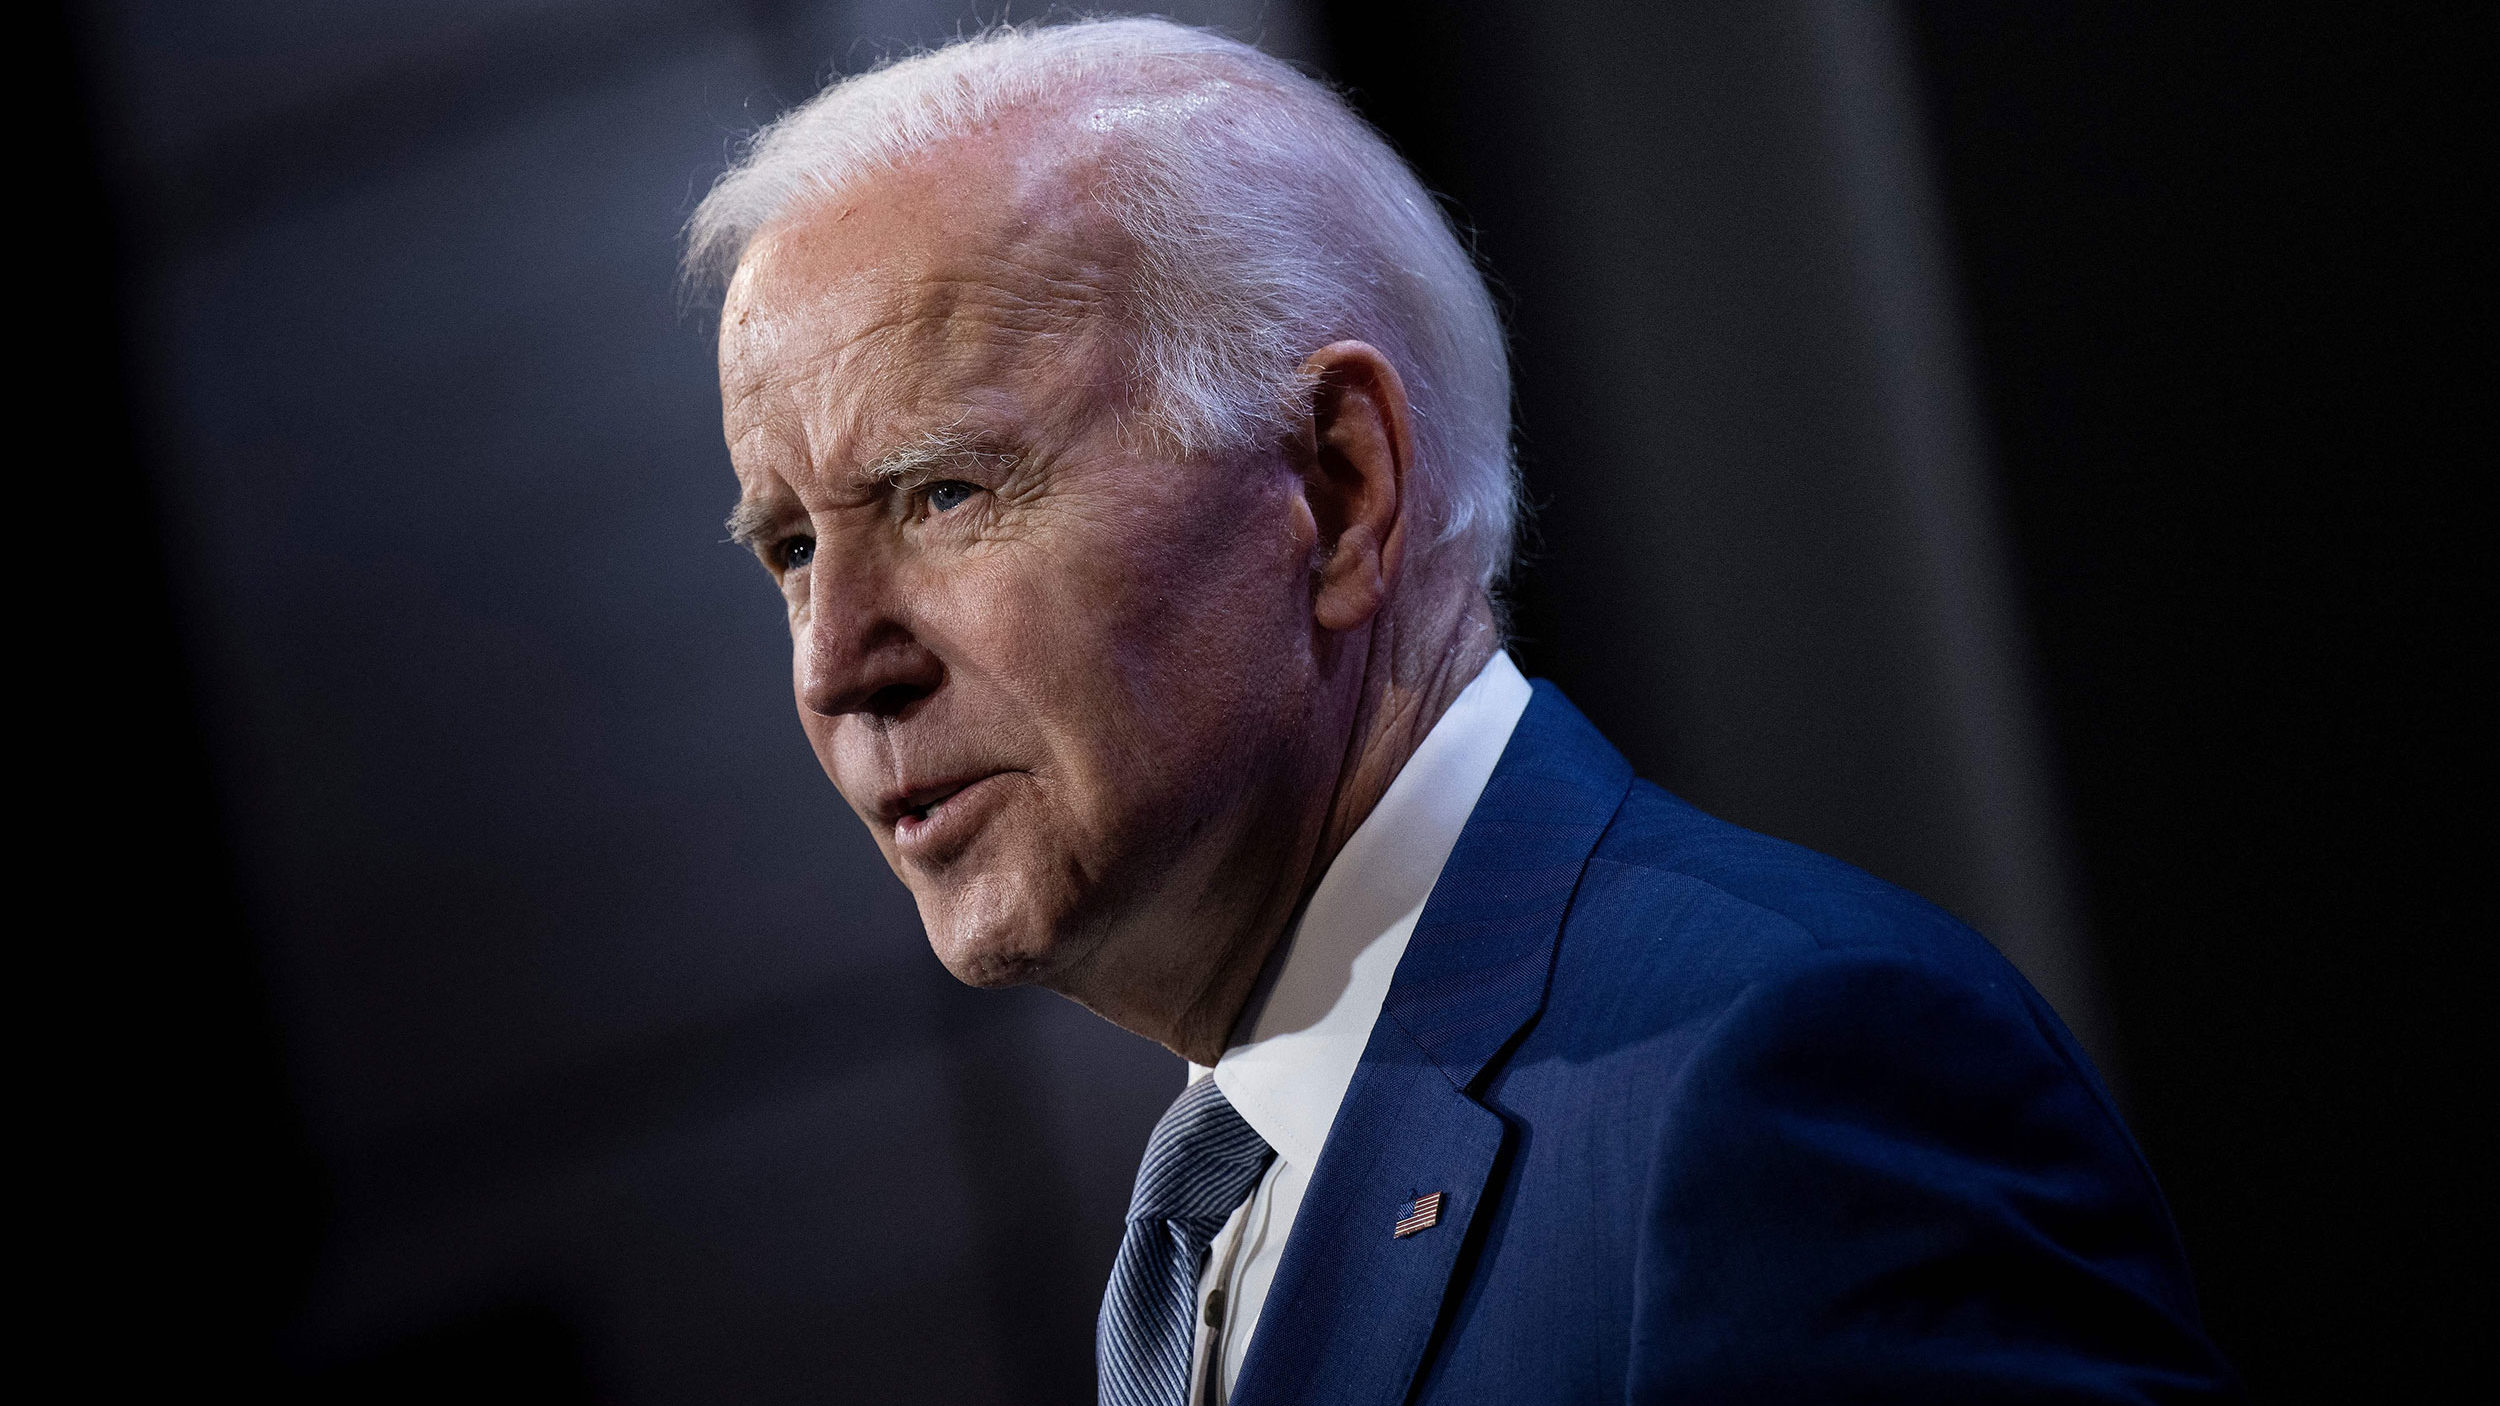 President Joe Biden said on October 21 that while he has not made a formal decision about running f...